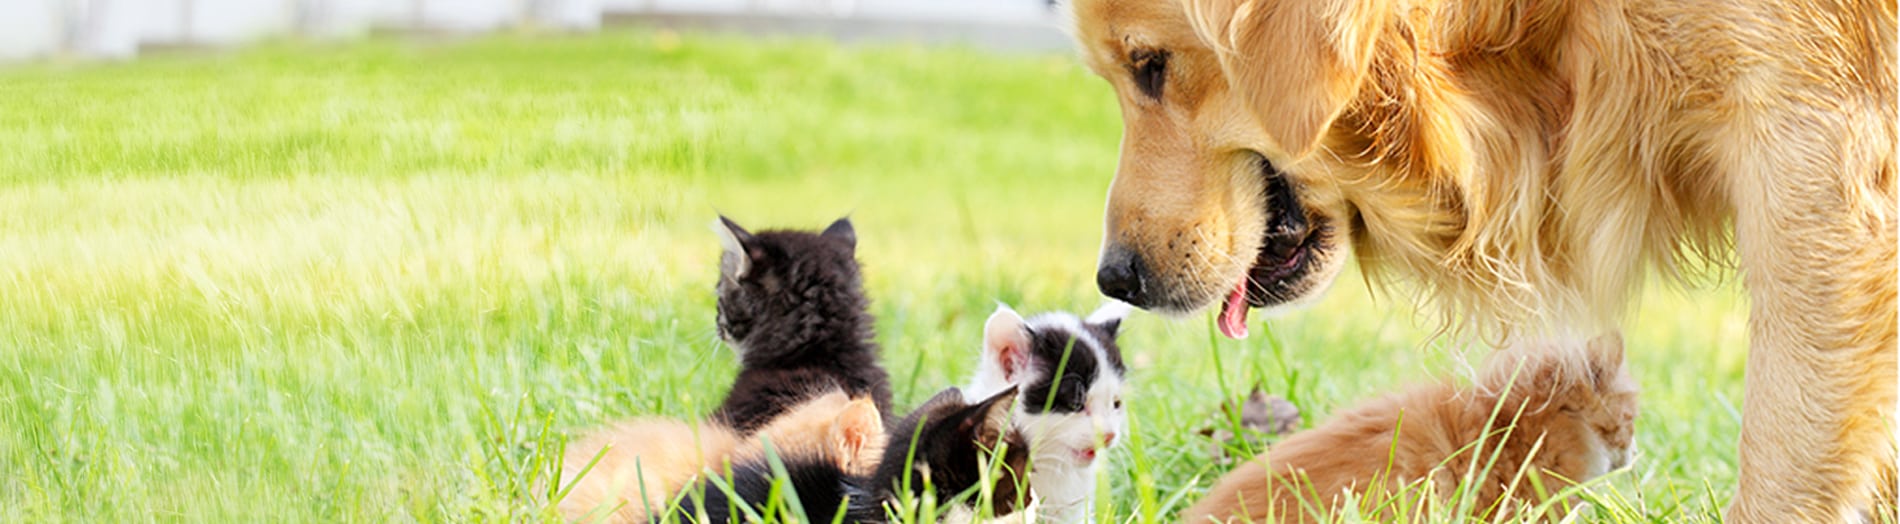 Golden retriever and group of a kittens in grass